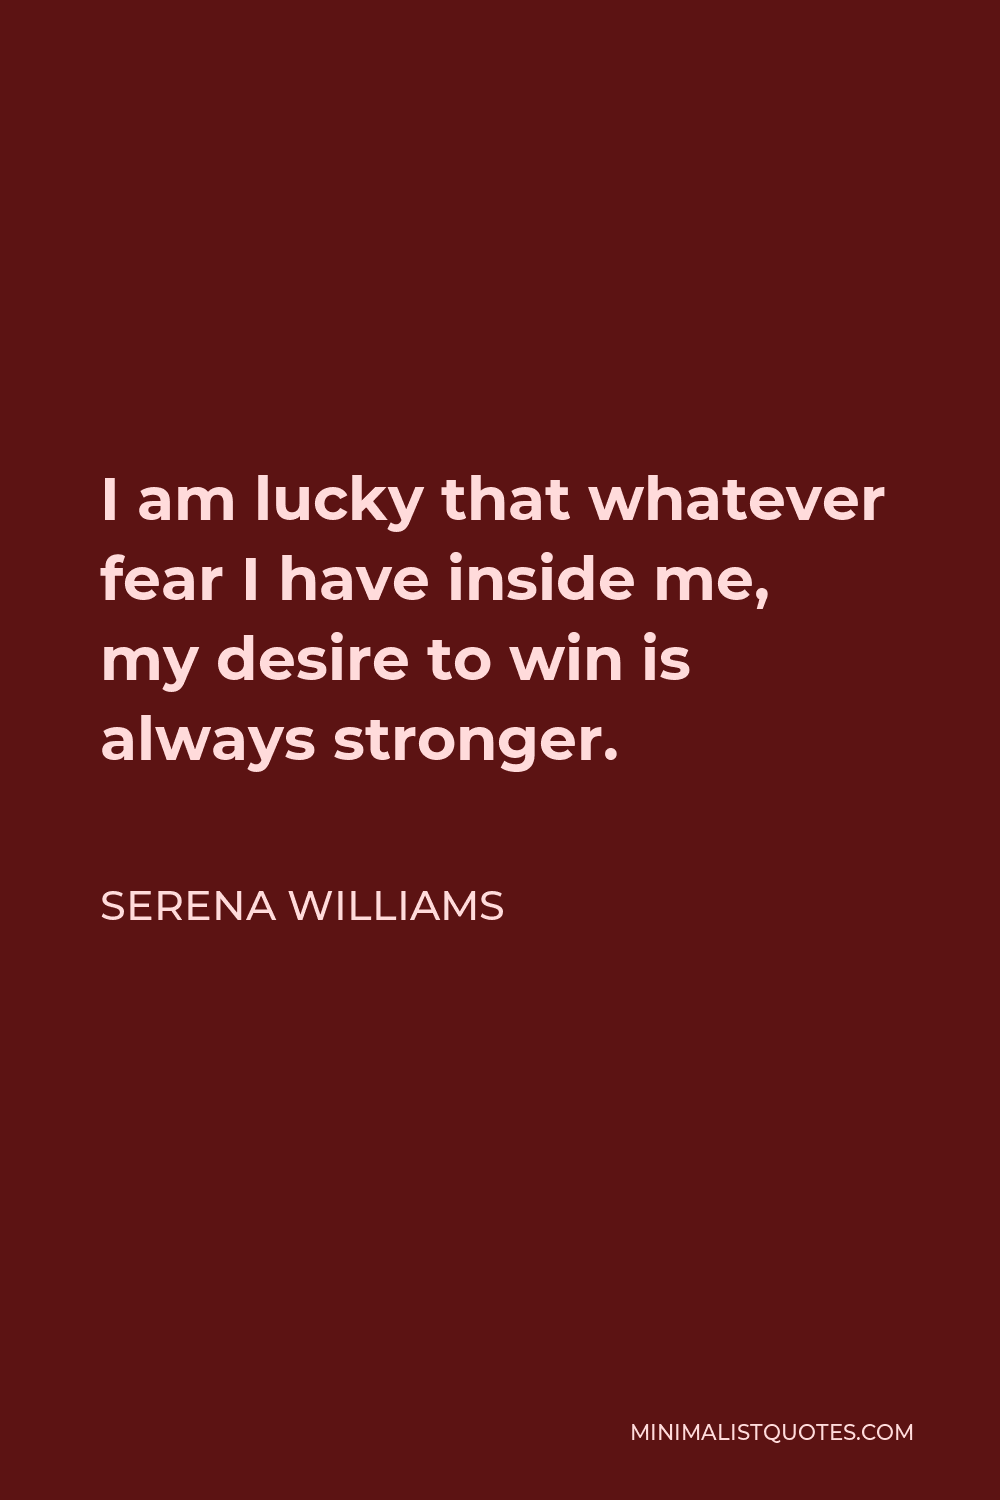 Serena Williams Quote - I am lucky that whatever fear I have inside me, my desire to win is always stronger.